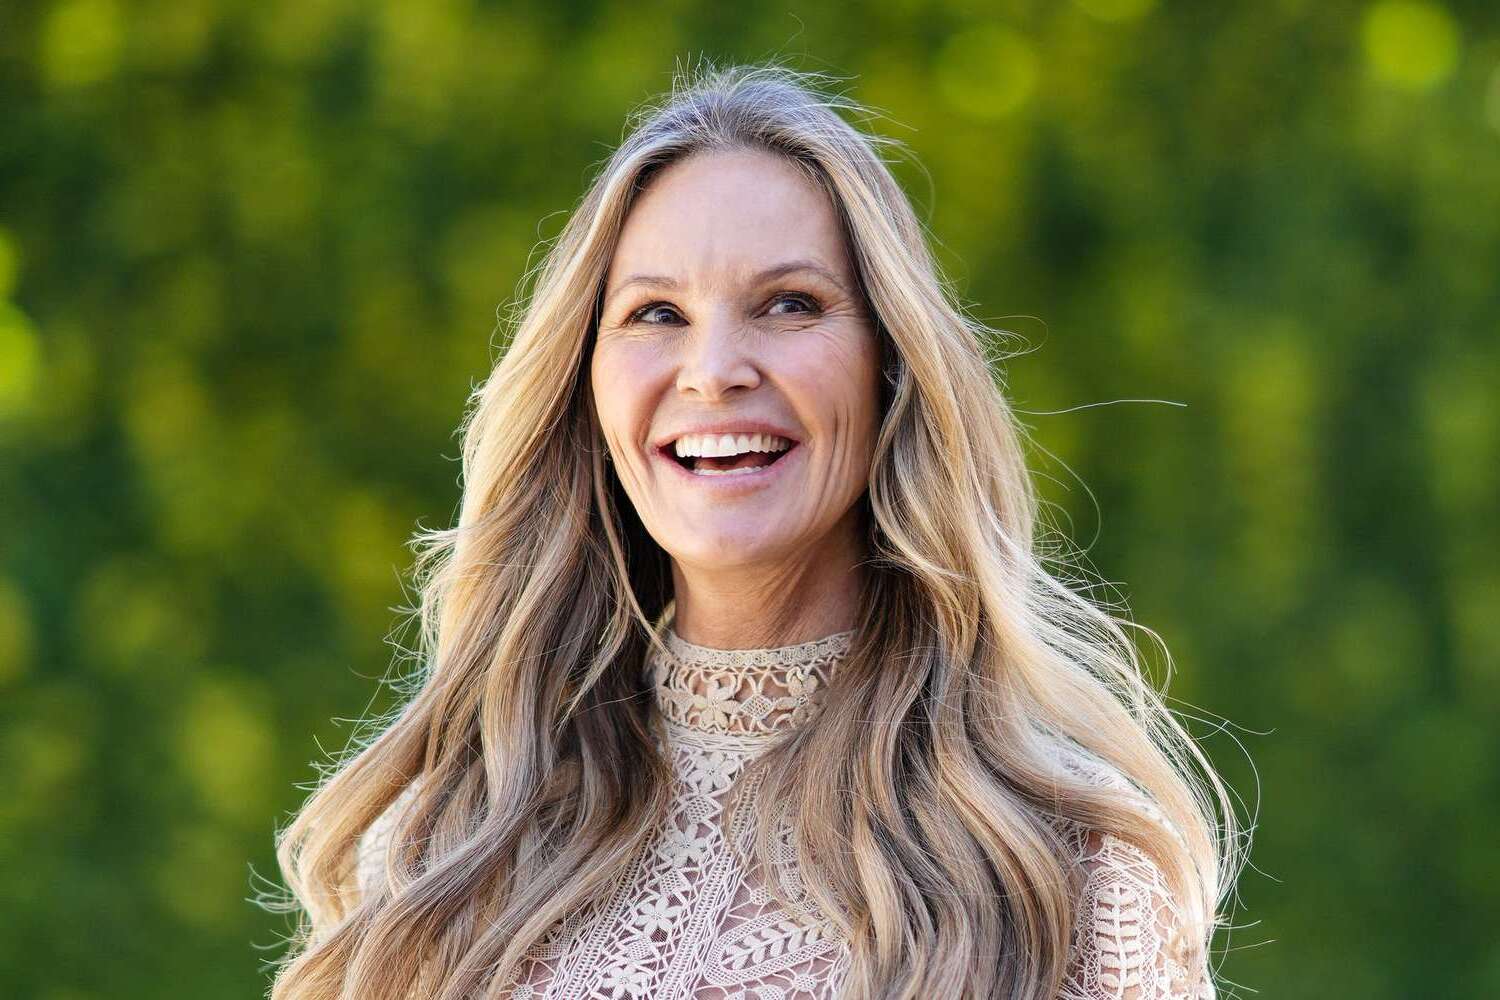 Elle Macpherson's Secret To Staying Youthful: Going To Bed Nude